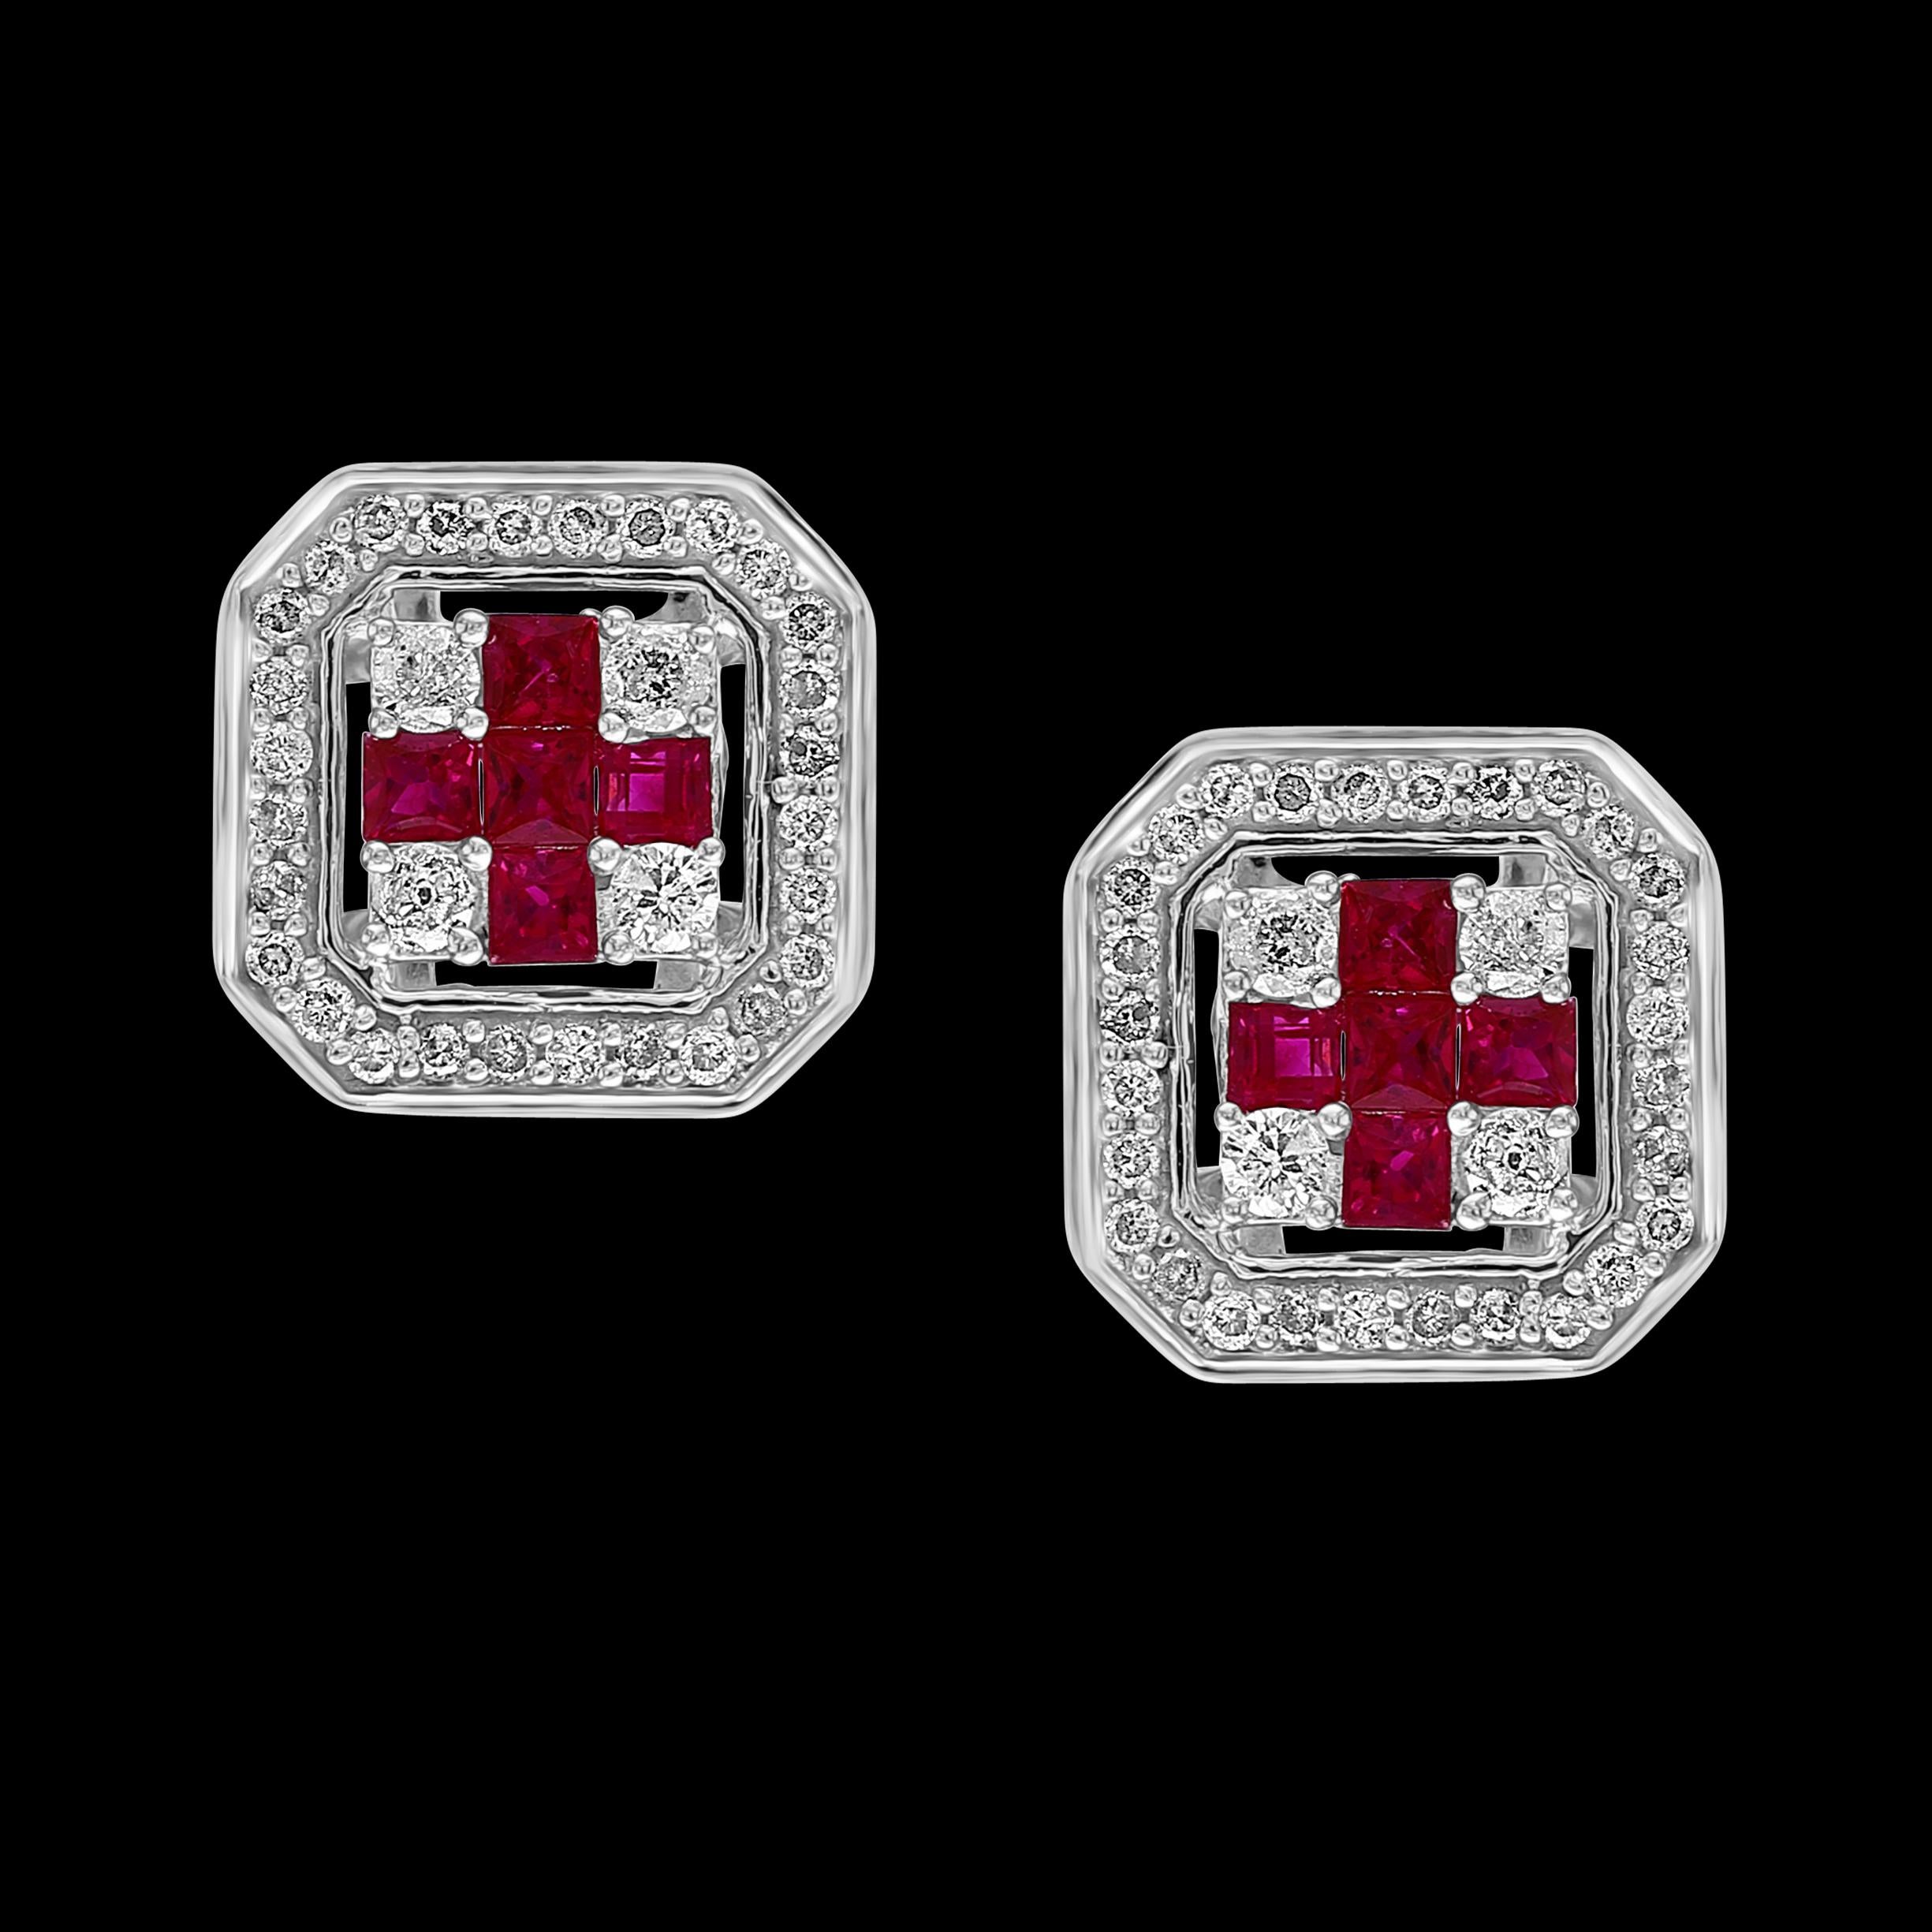 Princess Cut Natural Ruby and Diamond Stud Post Earrings 14 Karat White Gold
This luxurious pair of ruby earrings is designed in 14K White  gold. The Princess cut , Invisibly set  red Rubies are surrounded by a dazzling round diamonds.
Natural Ruby